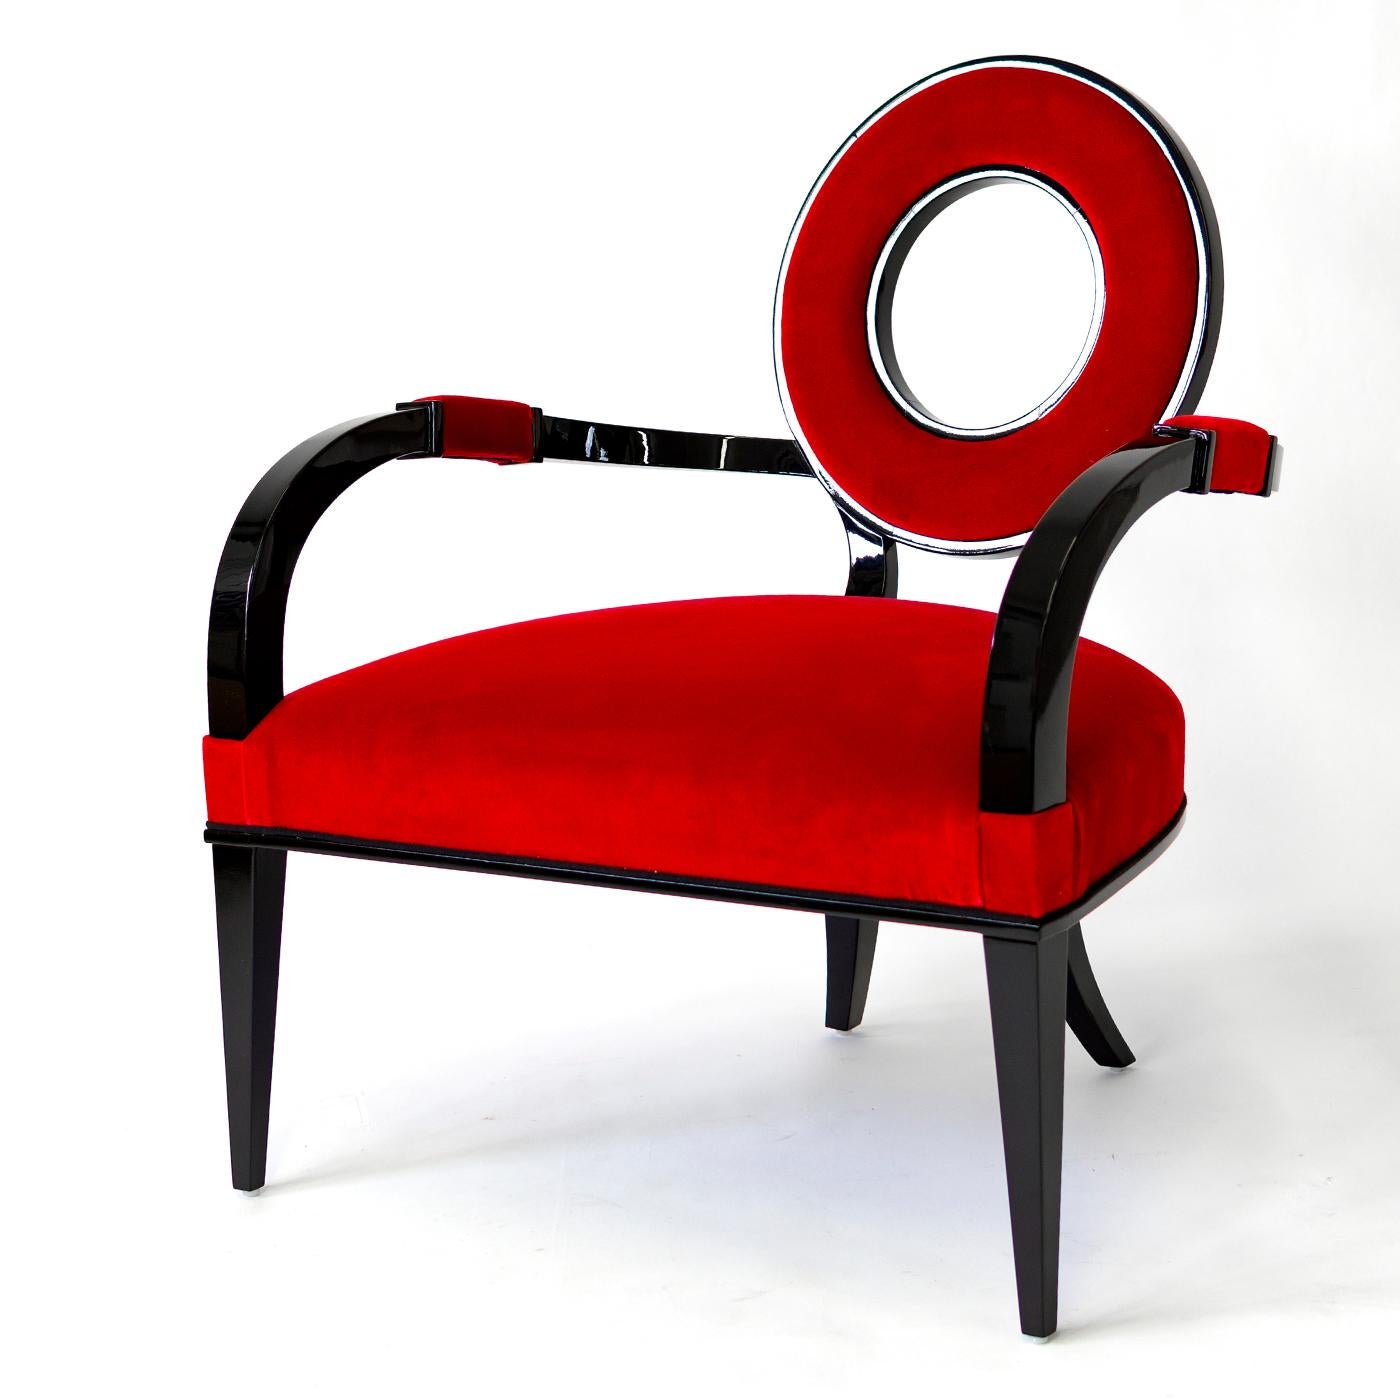 This armchair designed by G. Ventura boasts Art Deco-style reinterpreted with modern graphic details that highlight its timeless elegance. The sculptural silhouette features a unique construction with a generous seat, round open back and armrests